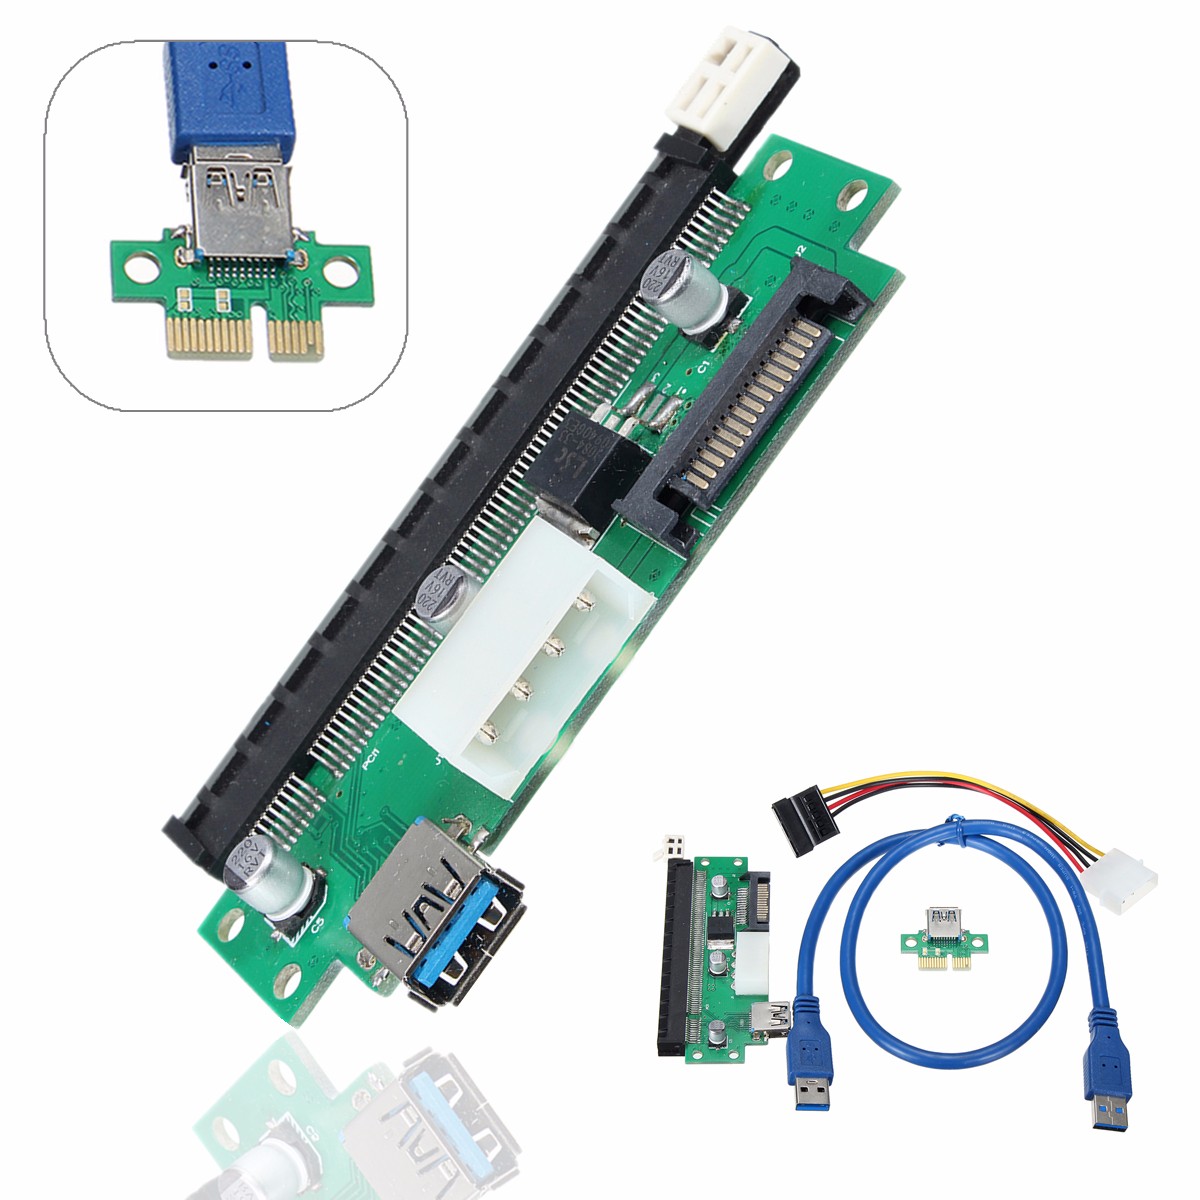 PCI-E-1X-to-16X-Extended-Card-Adapter-USB-30-Extender-Mining-Rig-Graphics-Card-Extension-Adapter-wit-1941181-2